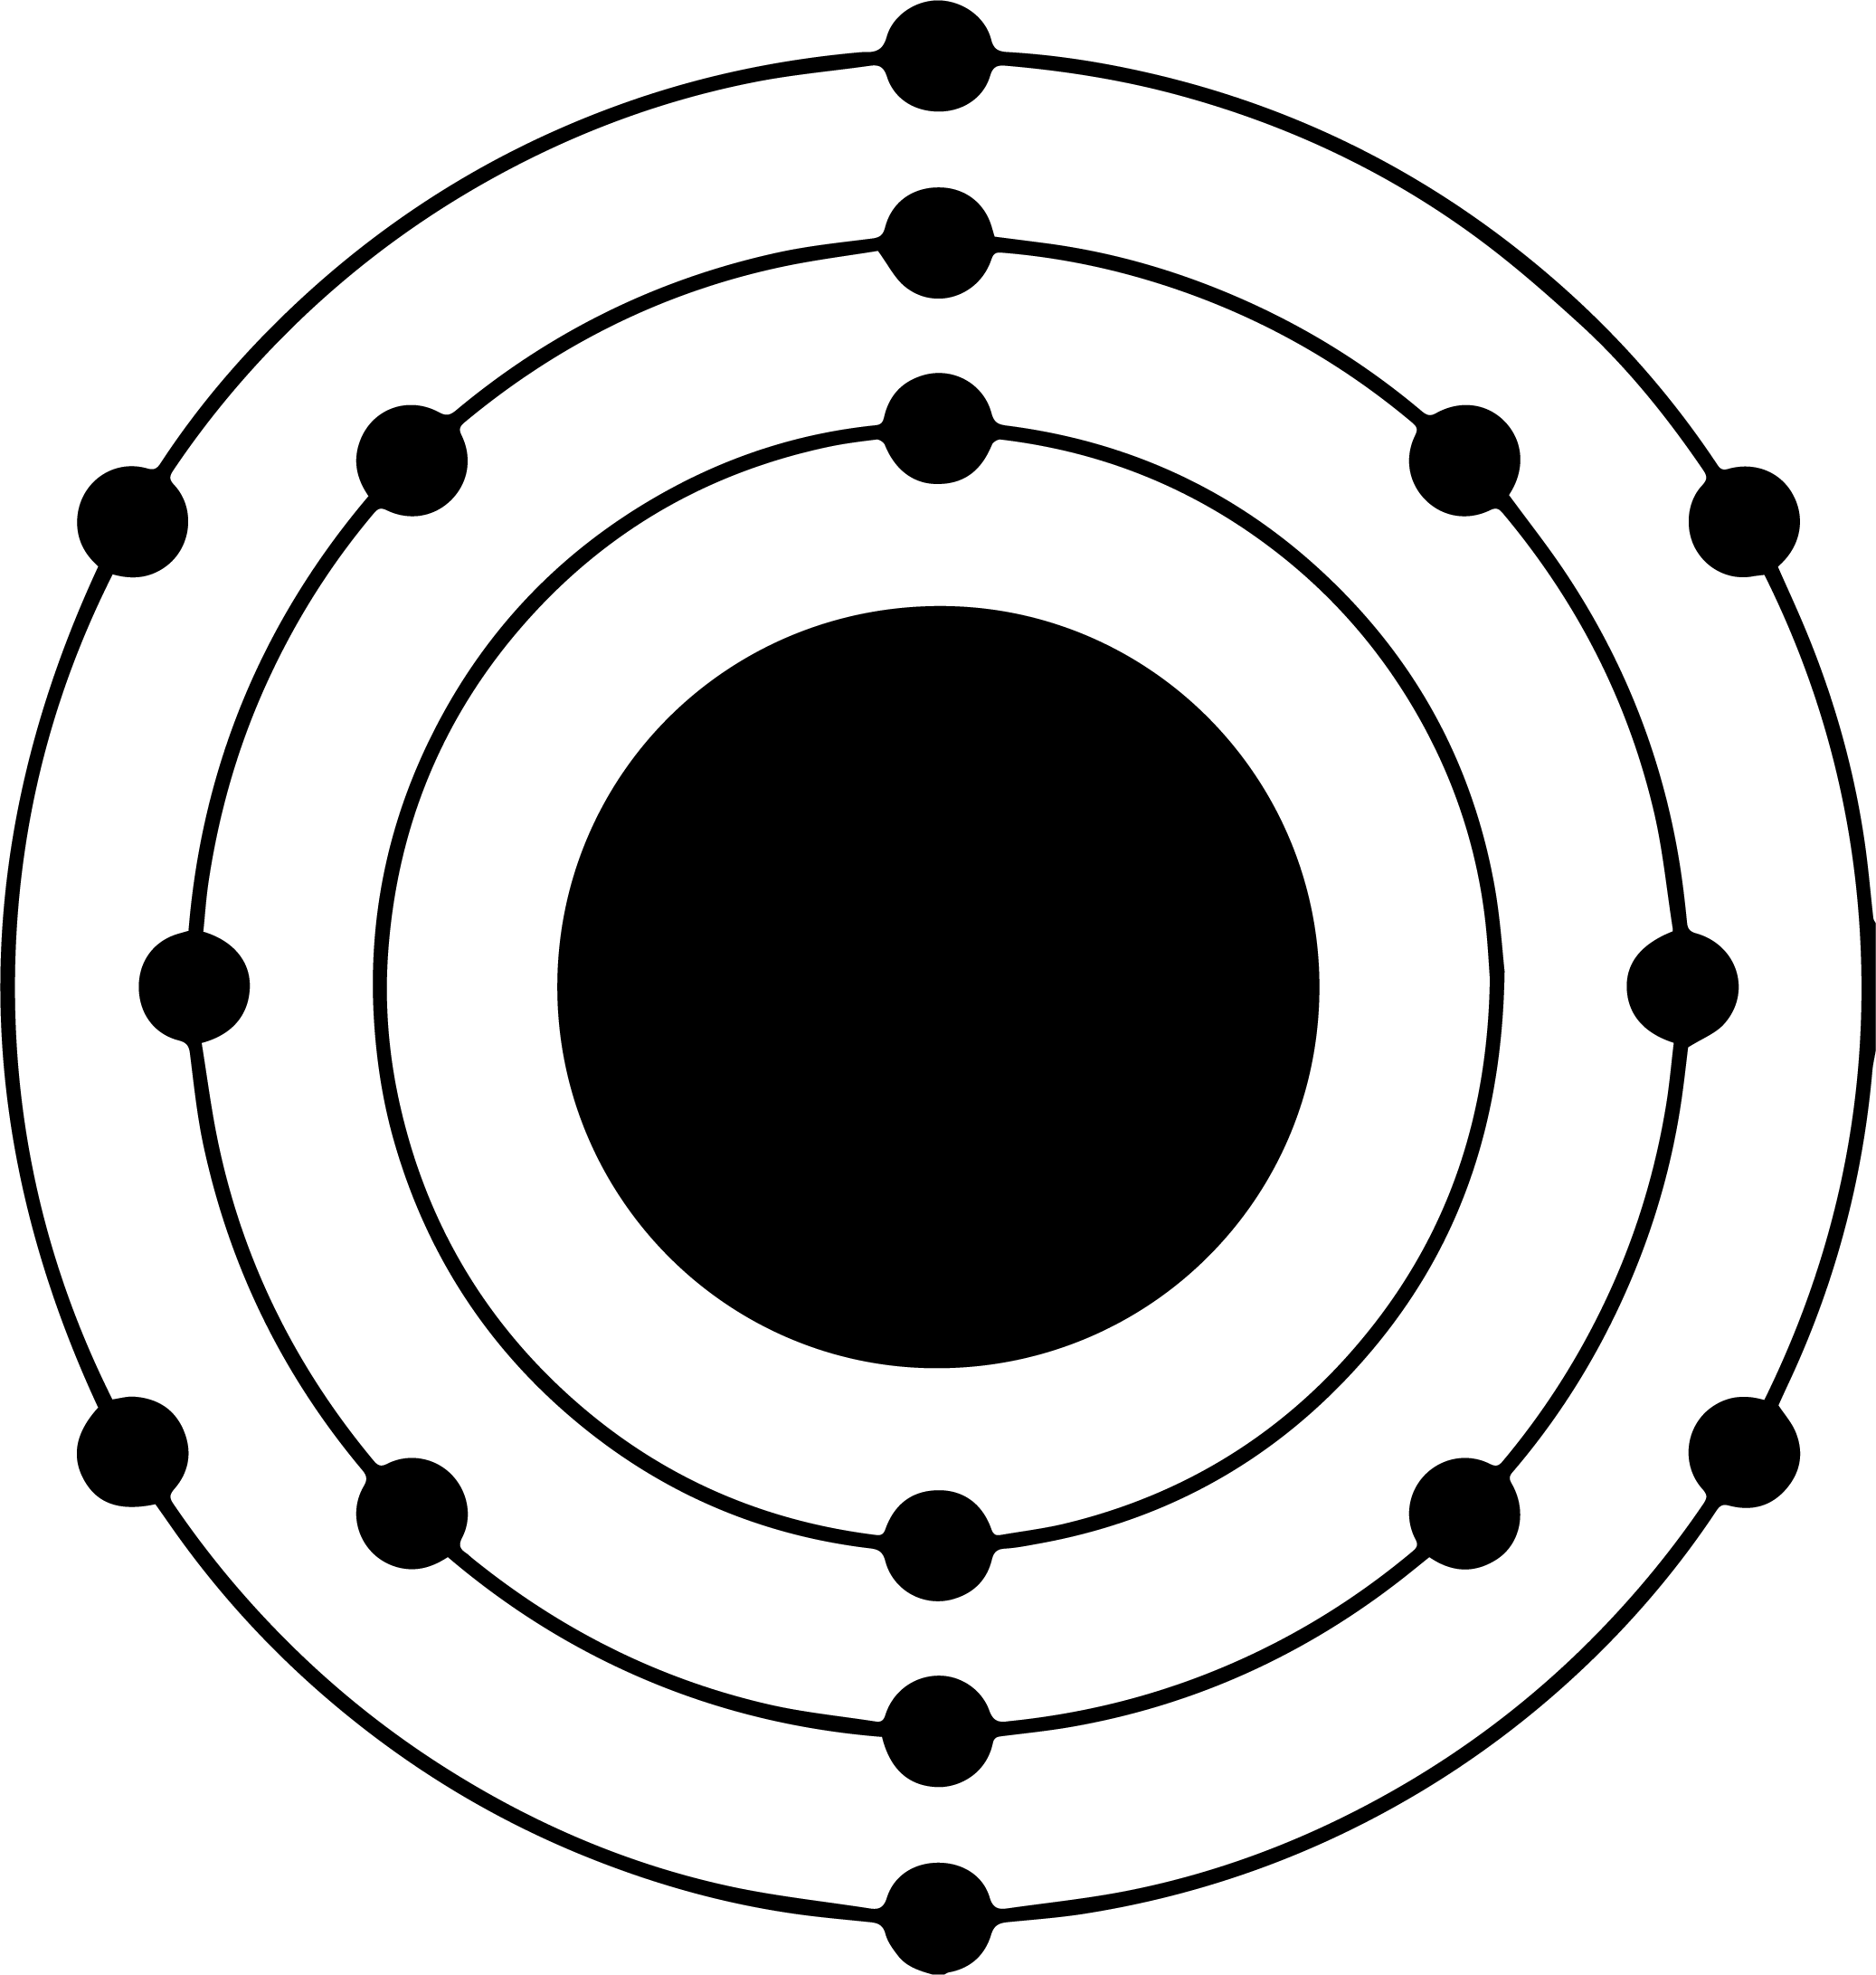 A drawing of a sulfur atom represented as a large black circle on a white background surrounded by 3 thin black rings with 2 small black circles on the inner ring, 8 small black circles on the second ring and 6 small black circles on the outermost ring. All the small circles are evenly spaced on their rings.